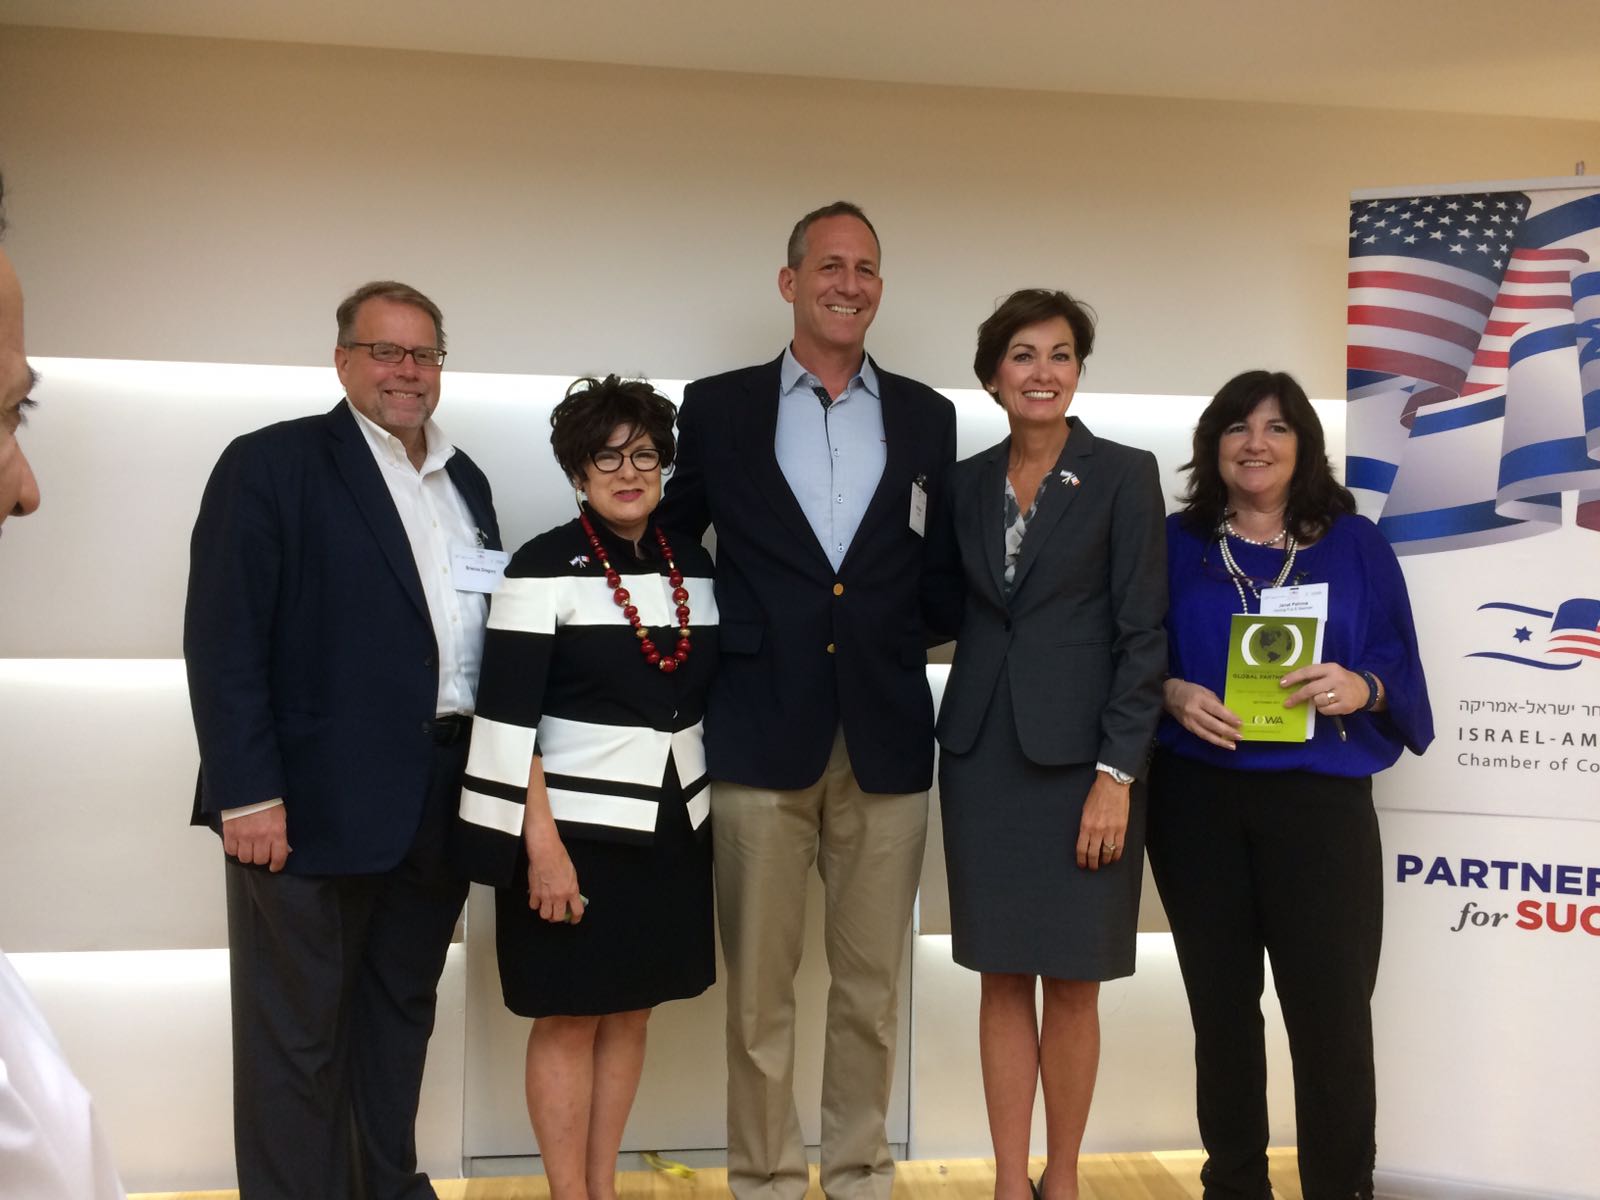 Iowa Governor Kim Reynolds with Chamber CEO Oded Rose, Debi Durham, and Greg Brisco, U.S. Embassy Commercial Attache